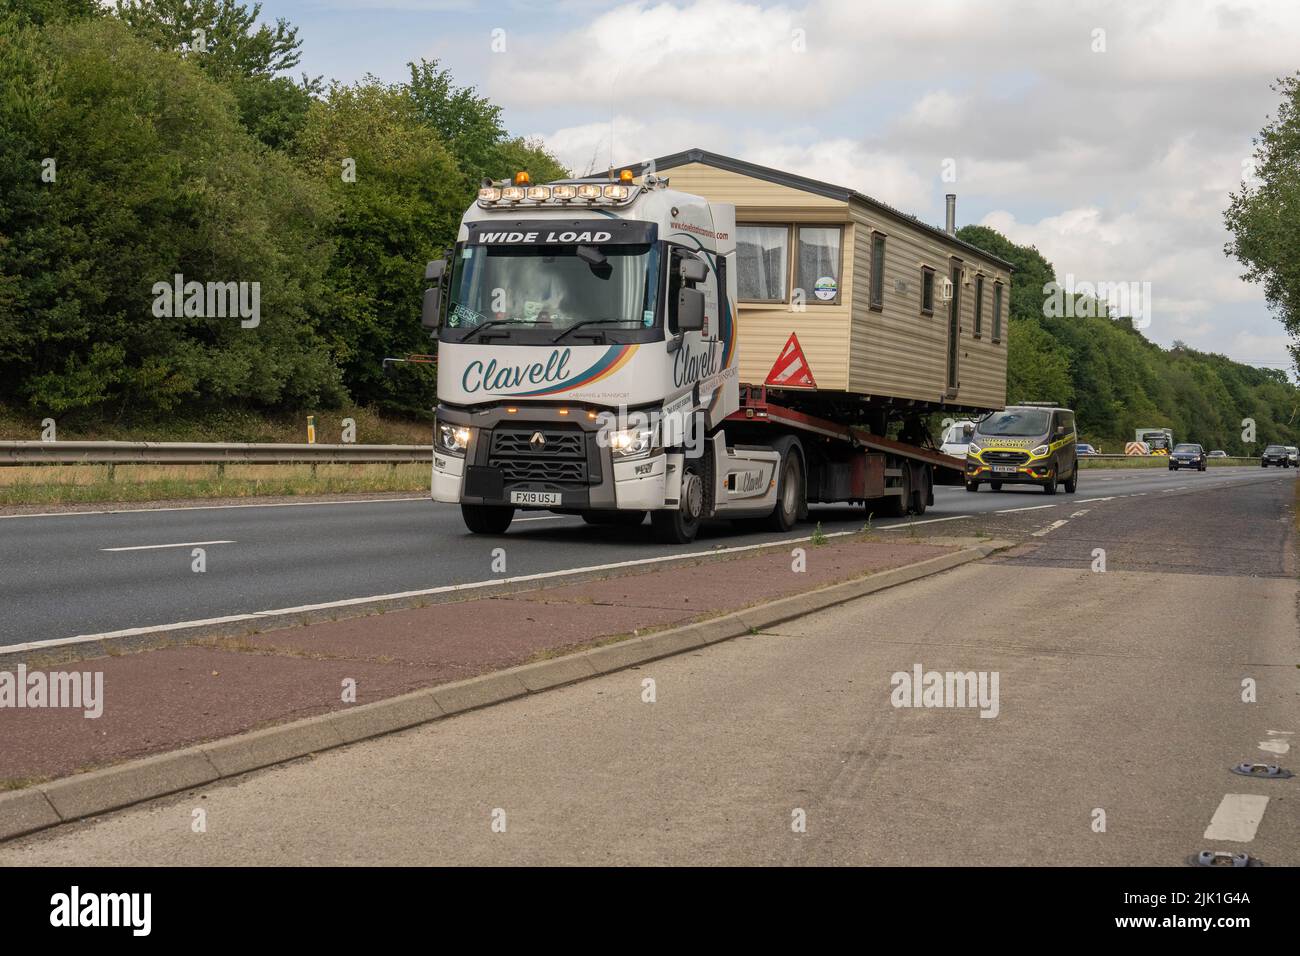 Clavell articulated lorry carrying wide load of a large caravan on the southern bypass norwich Norfolk Stock Photo